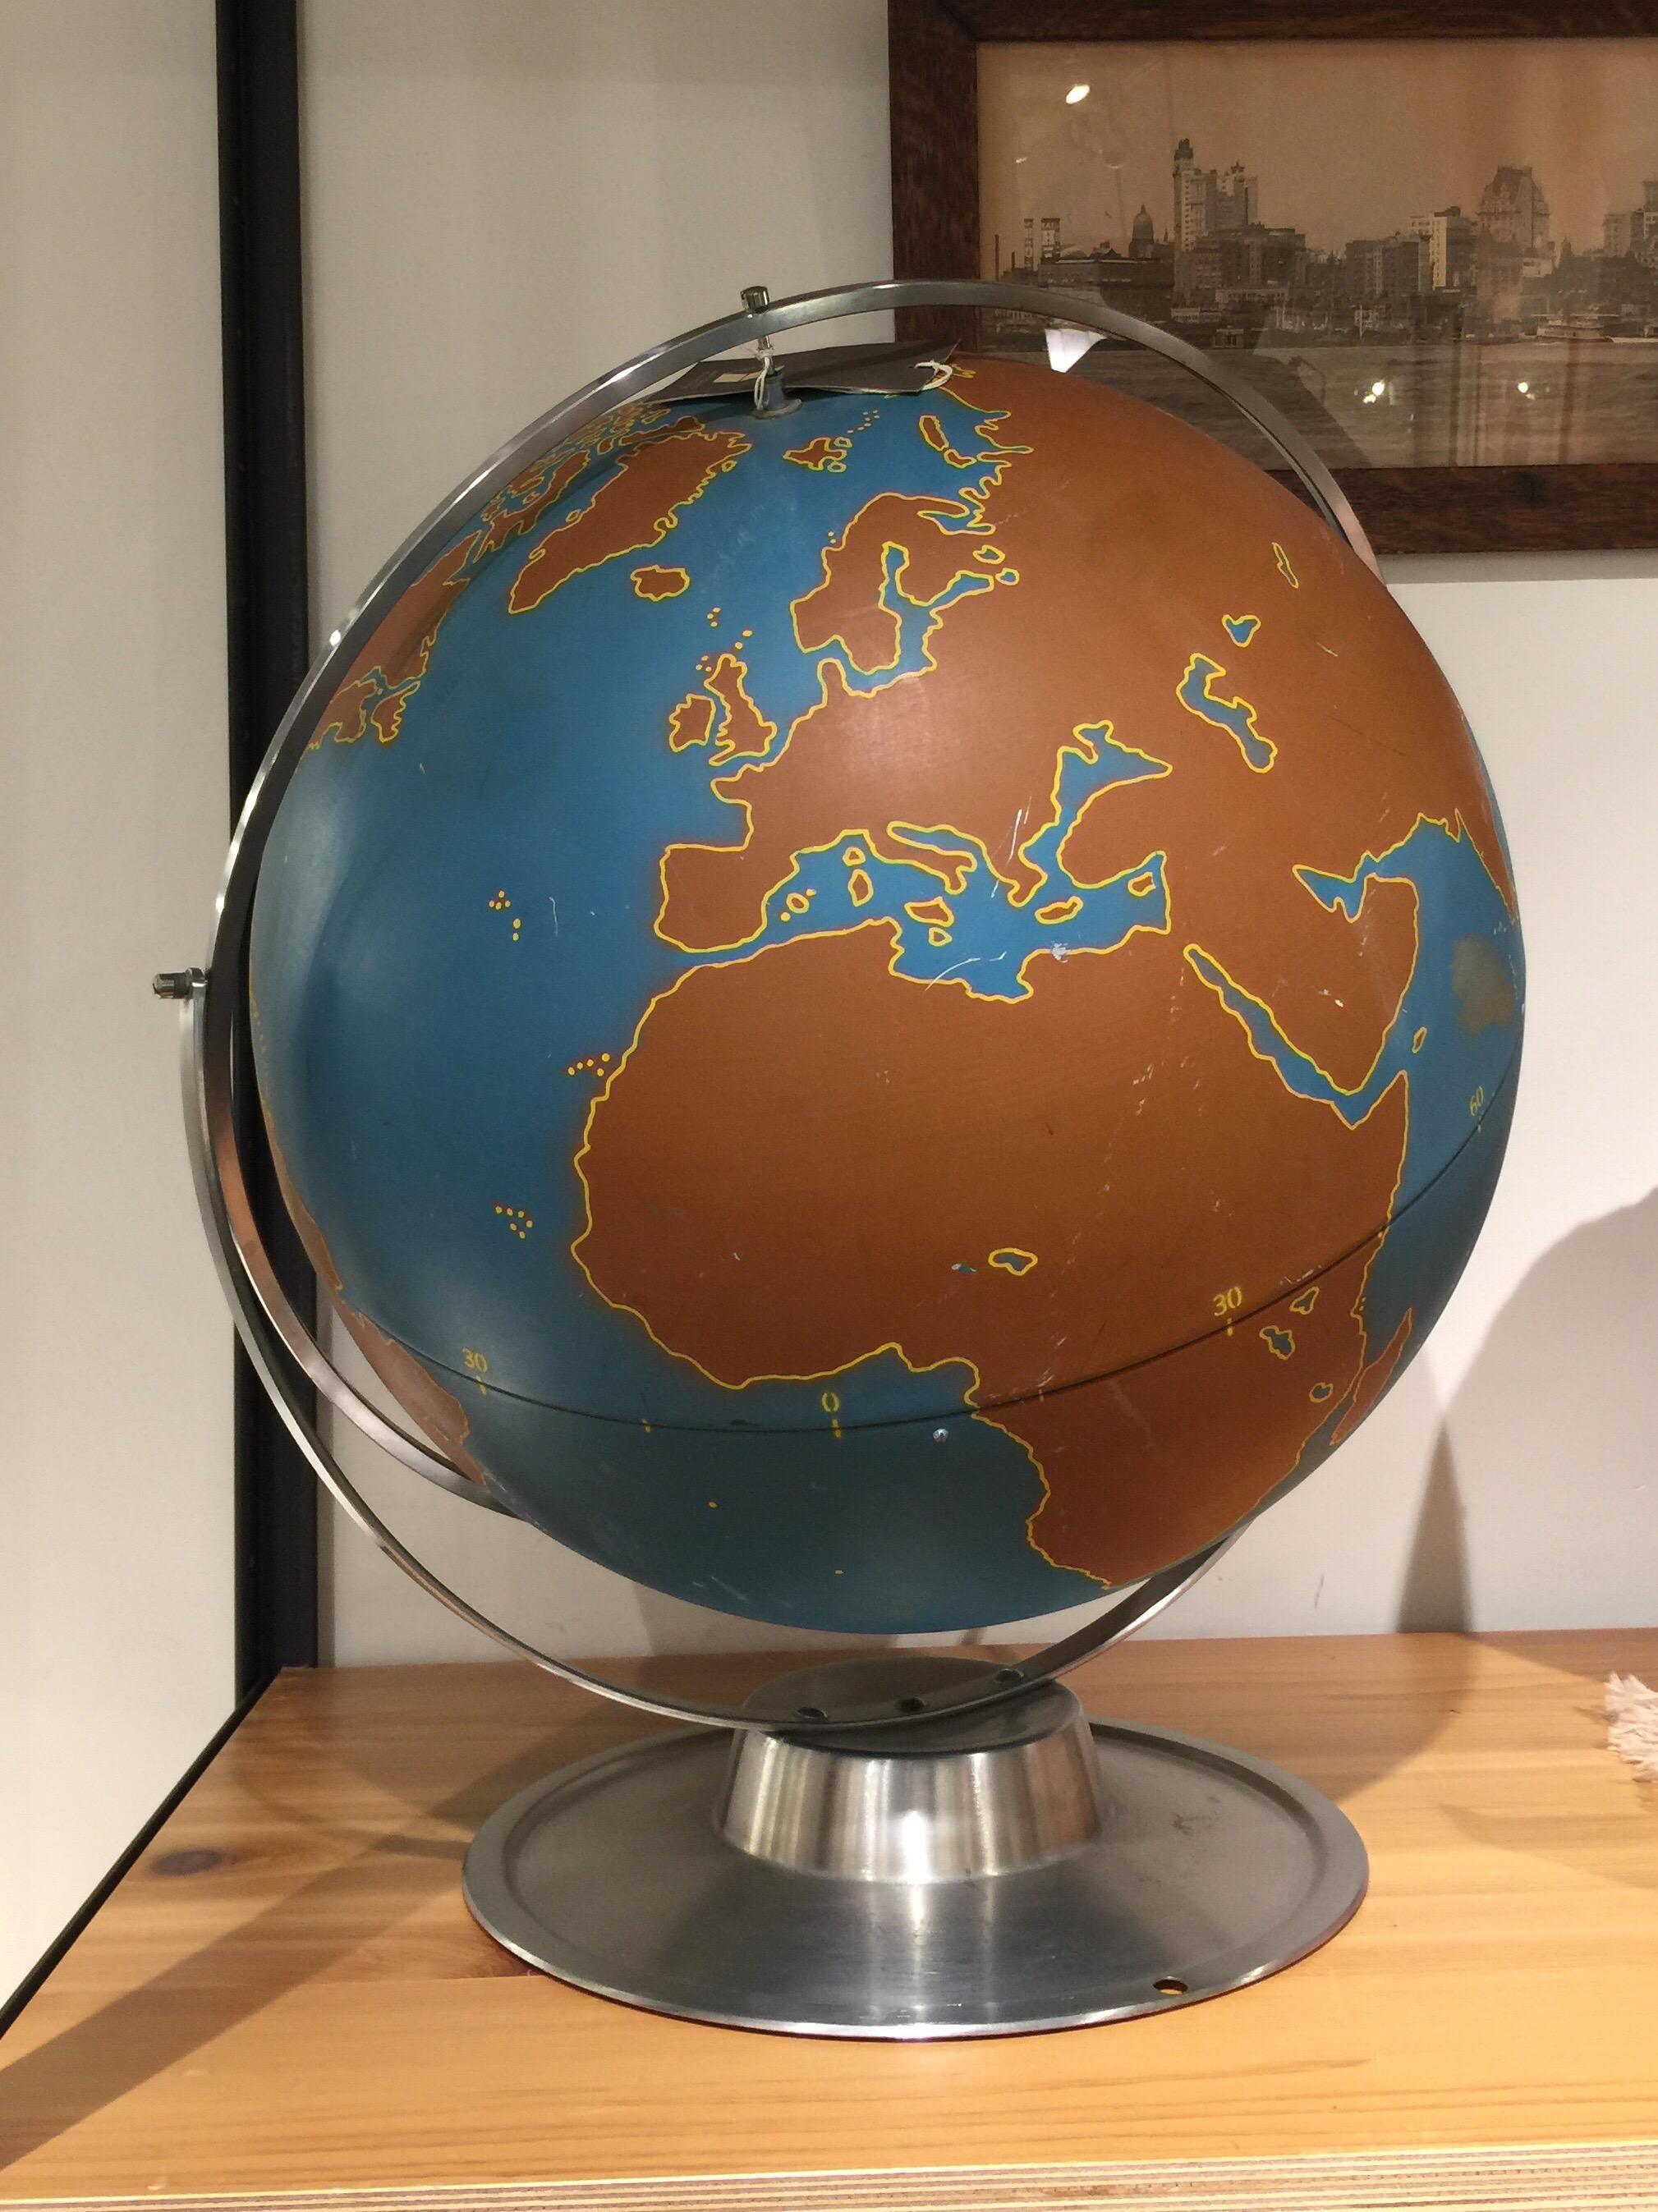 A vintage large school globe by A.J. Nystom Co. USA, circa 1950. 

Features delineated brown continents, along with oceans, latitude and longitude numbers against a blue ocean, but with no geographical names. Mounted on original round metal base